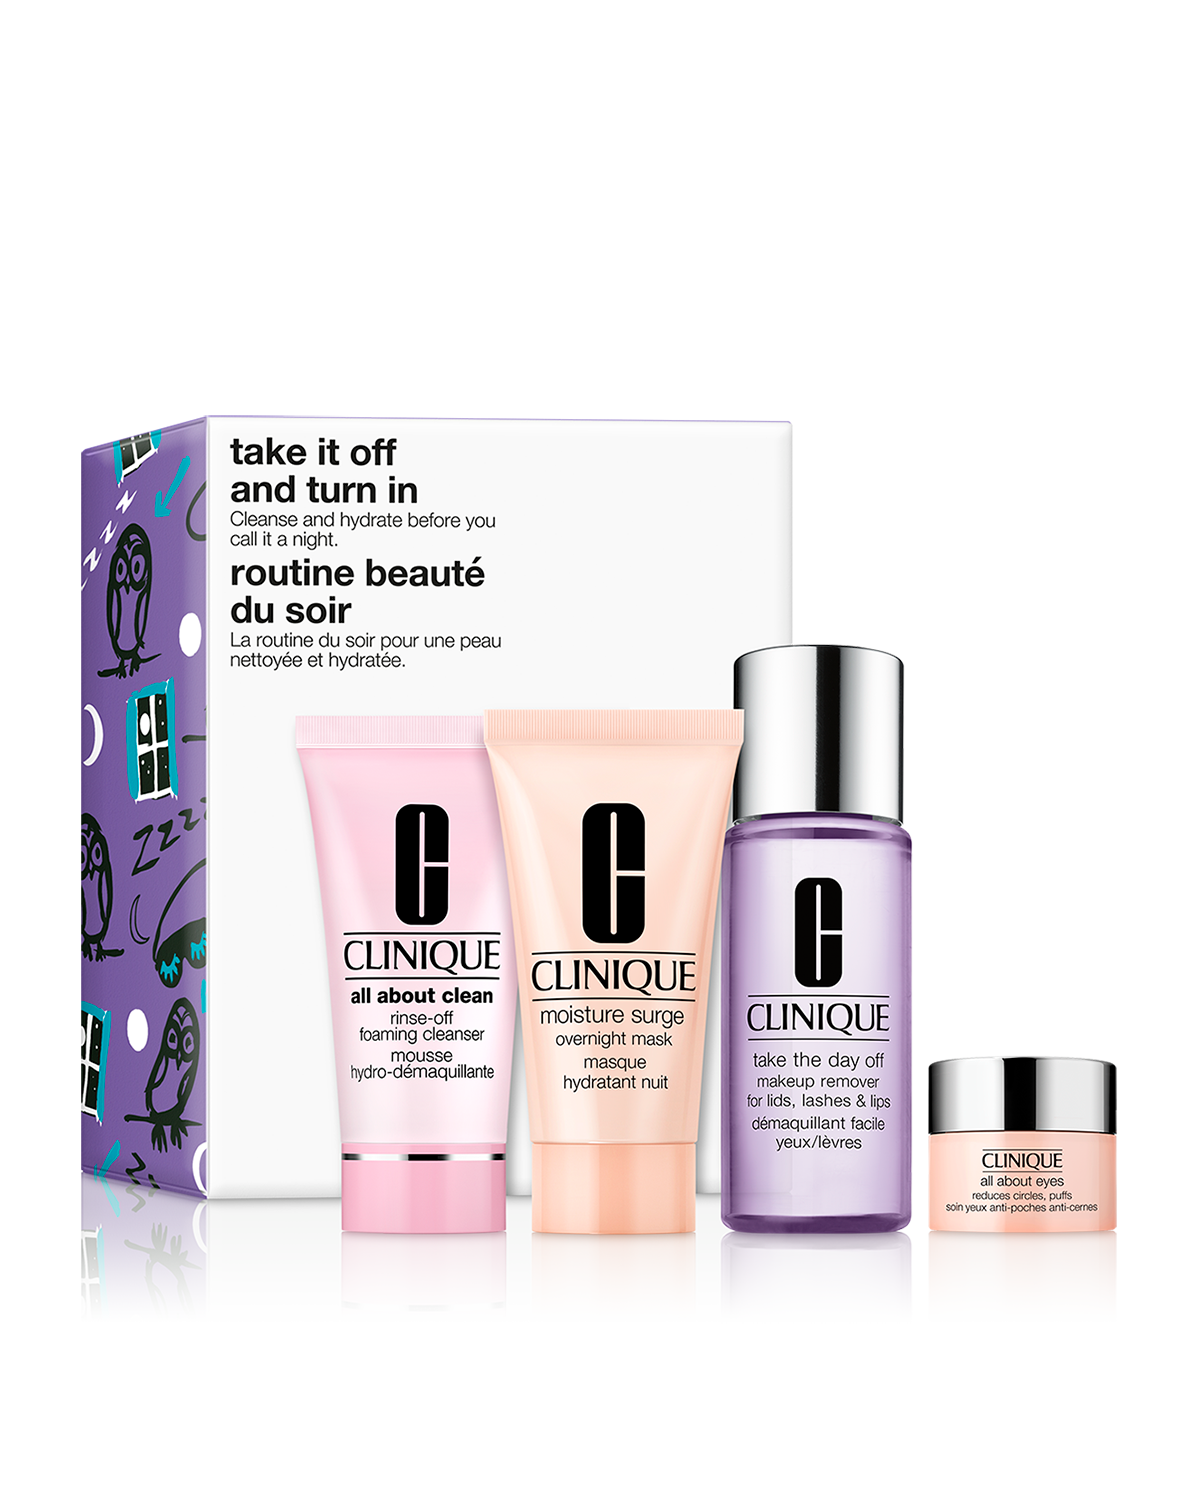 Take It Off and Turn In: Skin Care Set